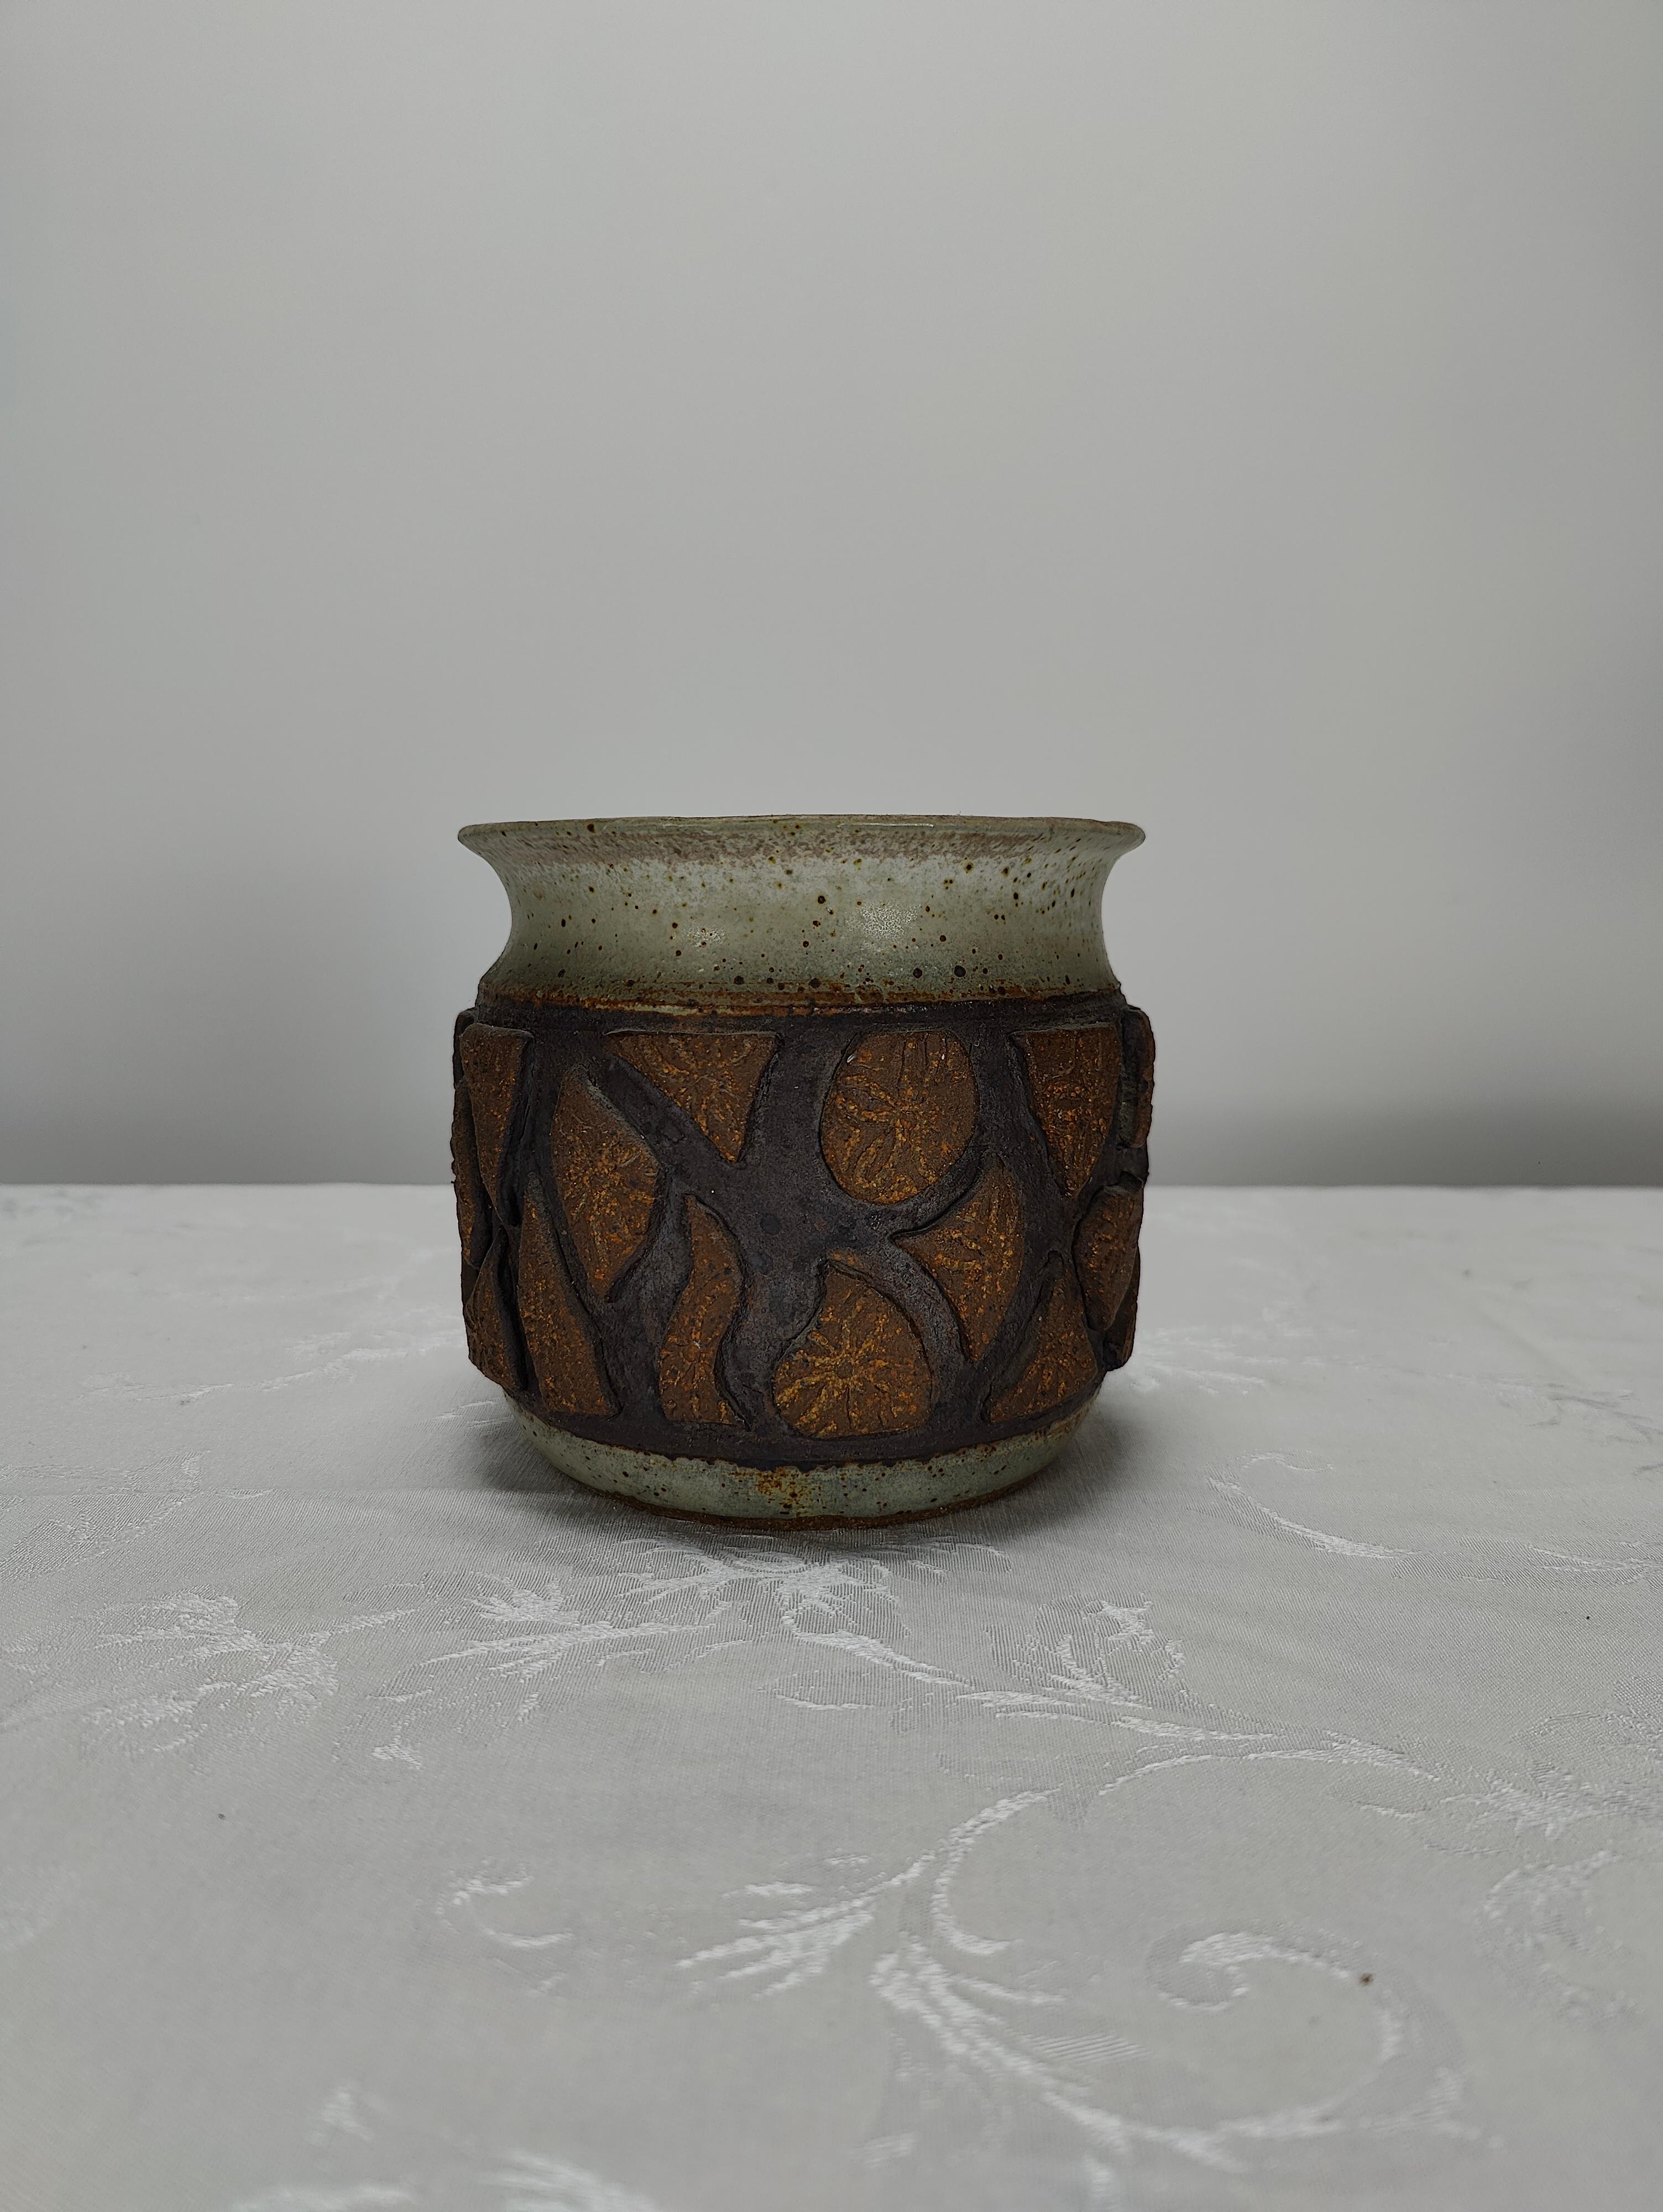 Just in, a beautiful planter by Maxine Scholts circa 1970s. Features a textured pattern on the outer side of the planter. Ceramic material. Measures approximately 6 inches in diameter by 5 inches tall. If you have any questions, please feel free to